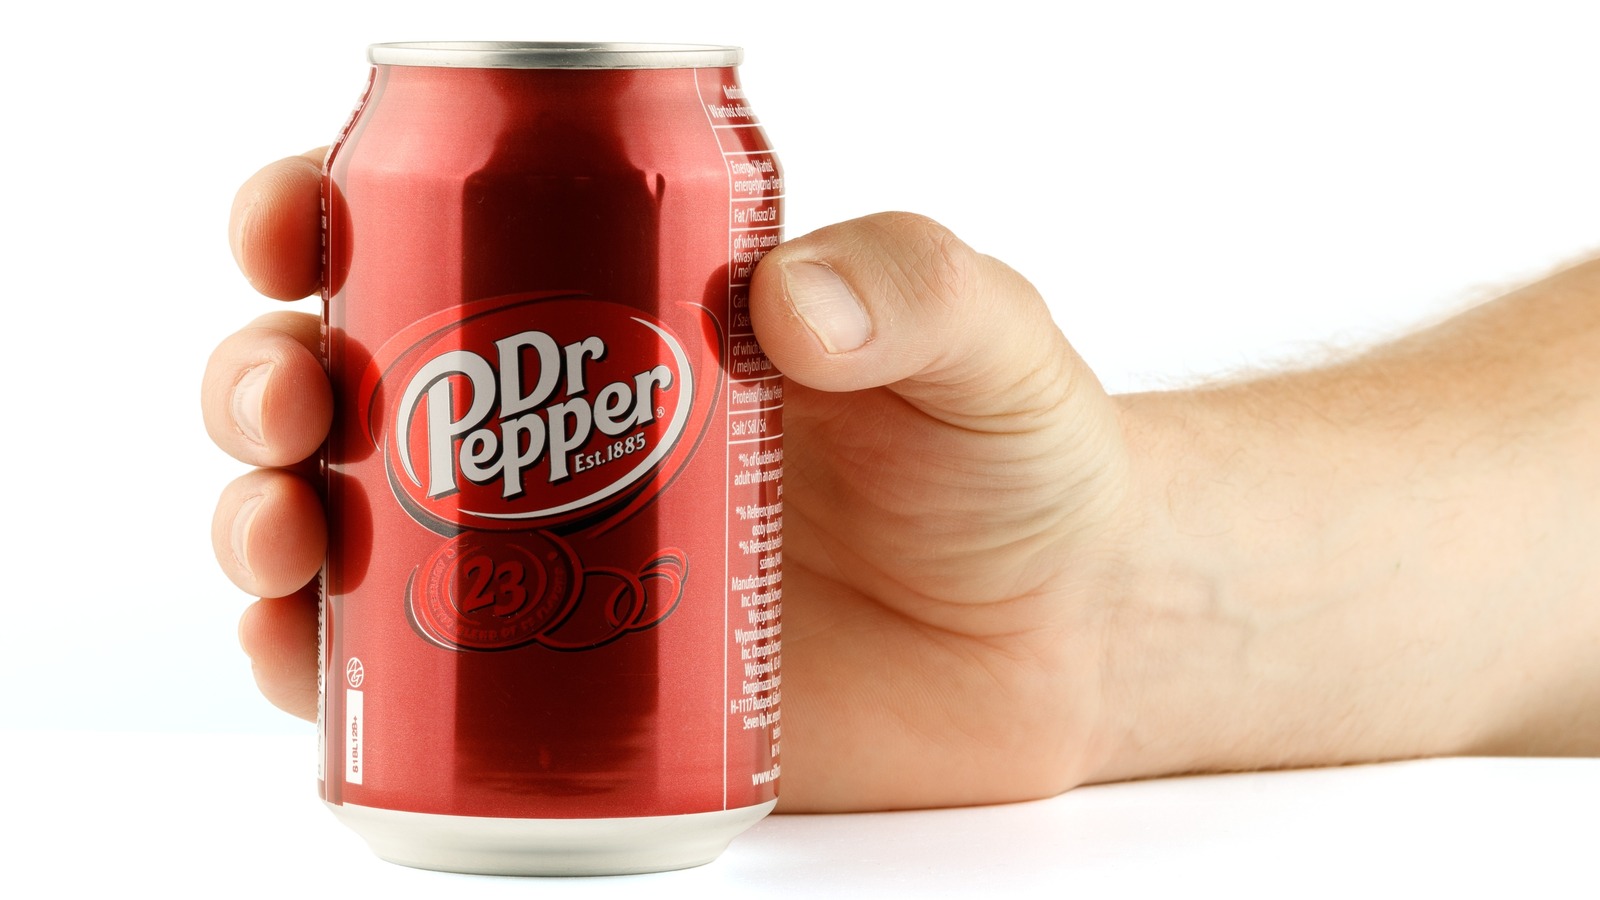 14 Facts About Dr. Pepper That Are Pretty Fascinating